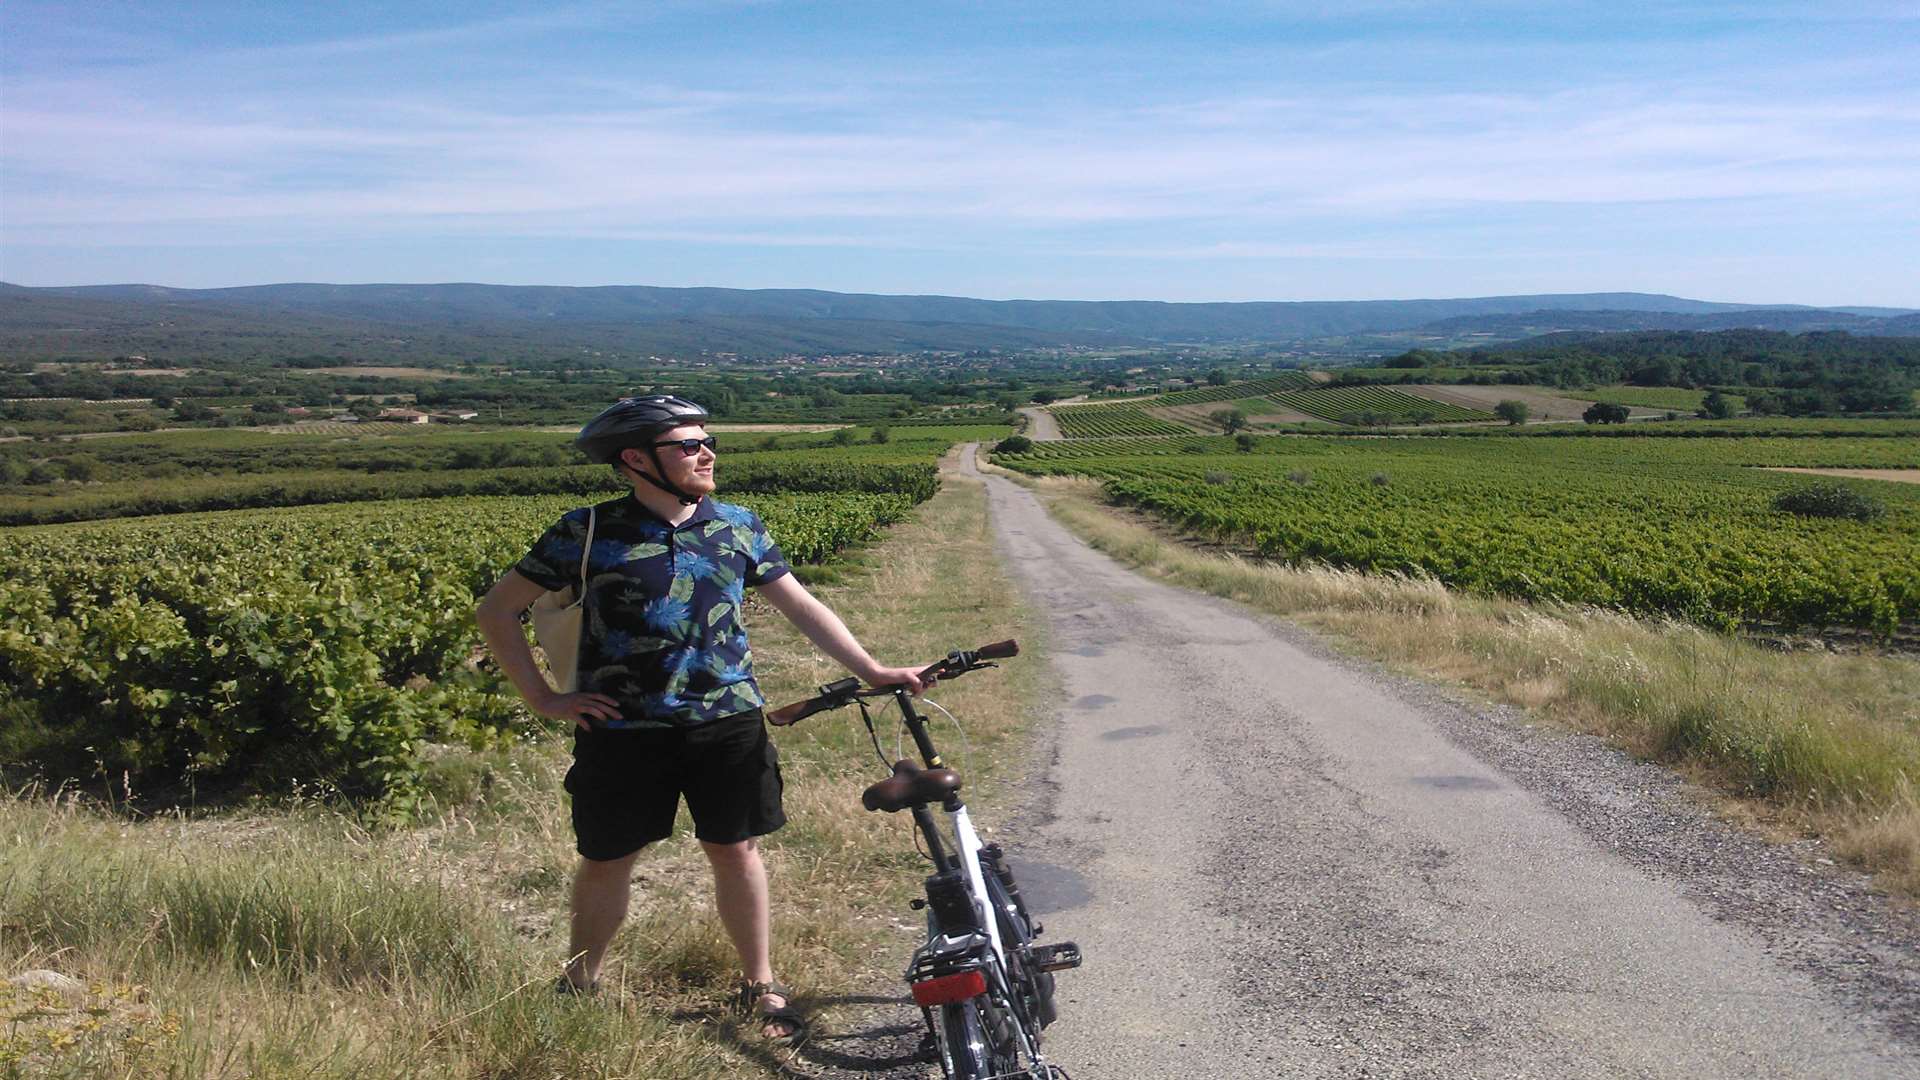 I can't recommend this enough - riding an electric bike around the vineyards and cherry trees of Terraventoux, a co-operative winery in Villes-sur-Auzon